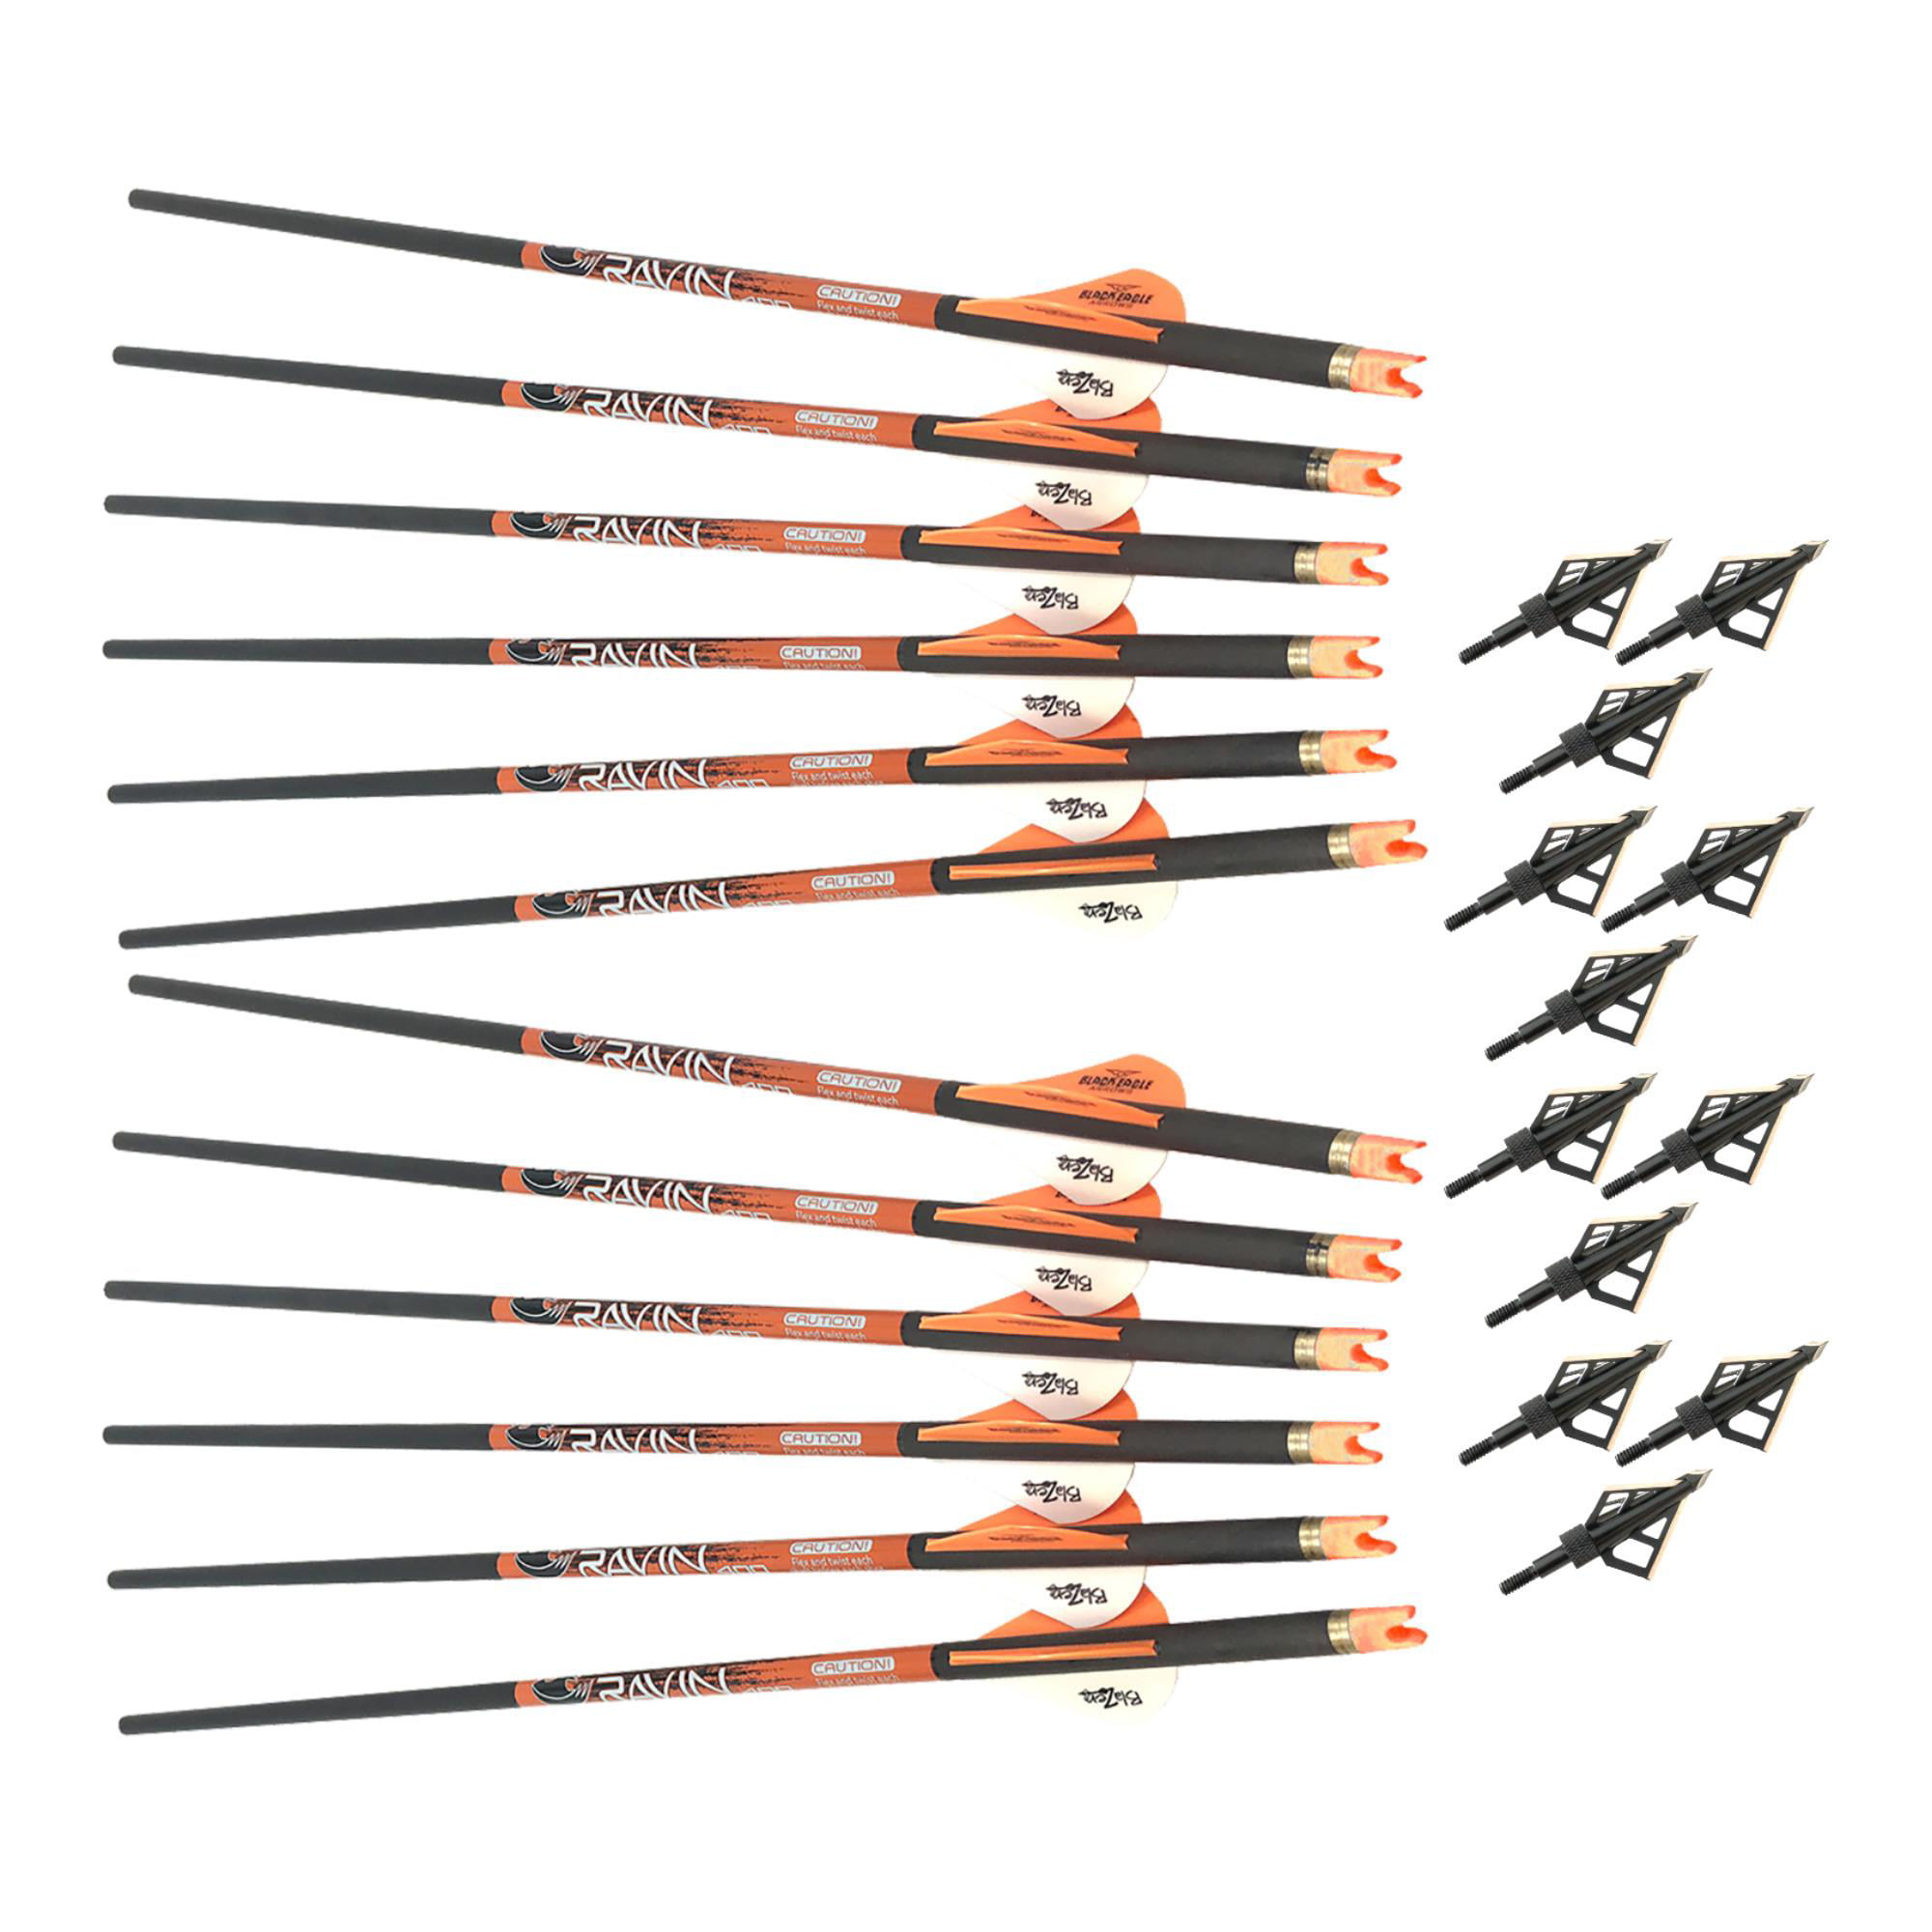 Arrows .003 straightness 3 Pack Xbow Bolts with Lighted Nocks RAVIN Crossbow 